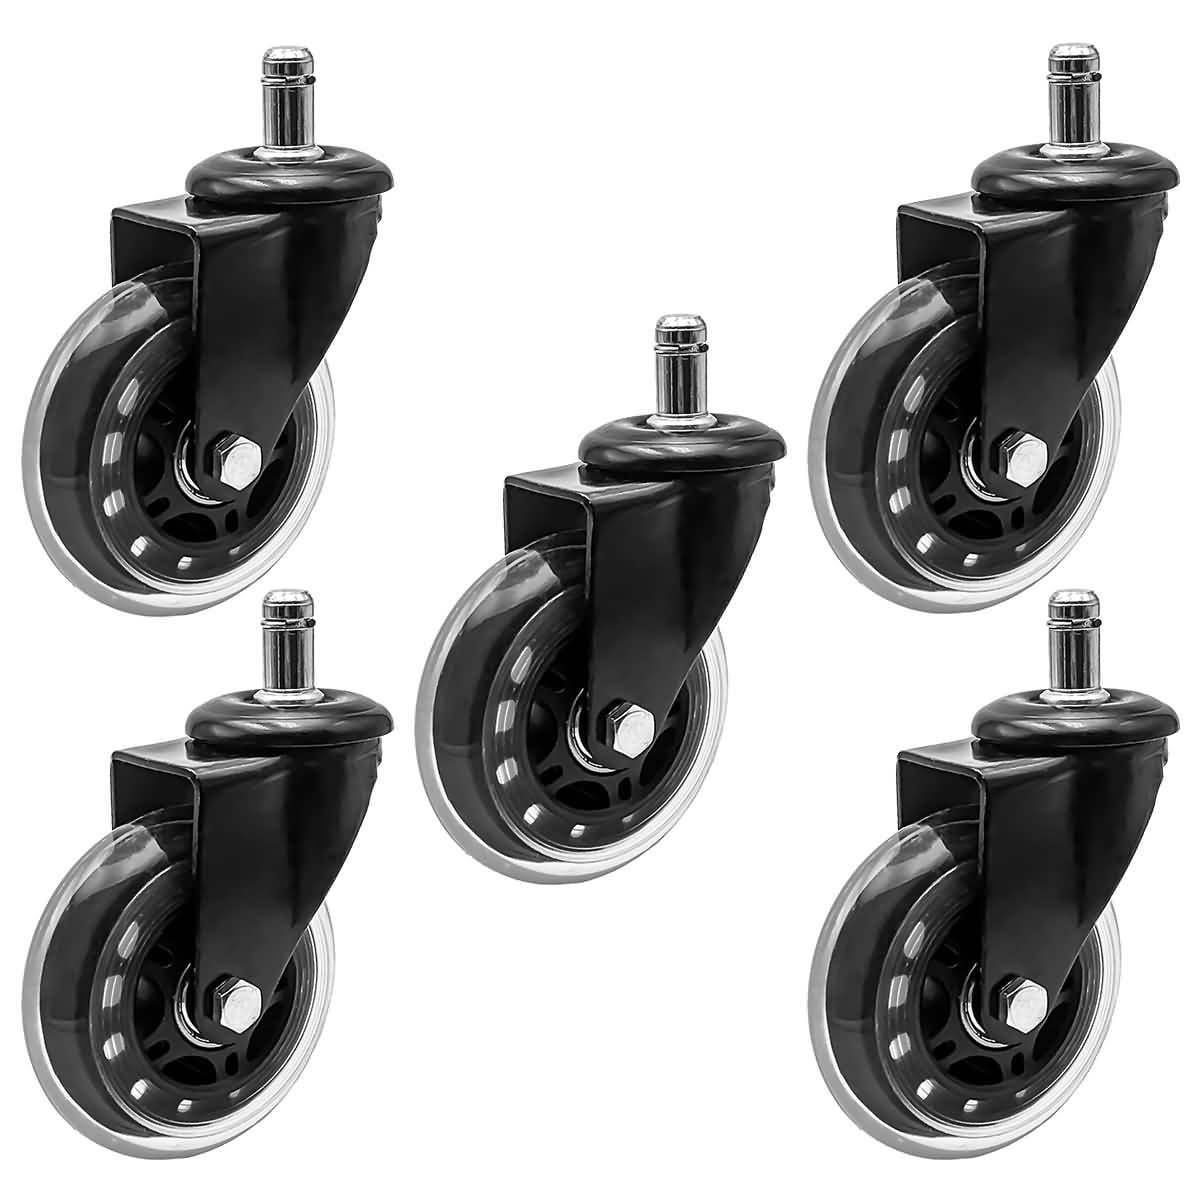 10 New Office Chair Casters Wheels Swivel Floor Furniture Replacement plastic 